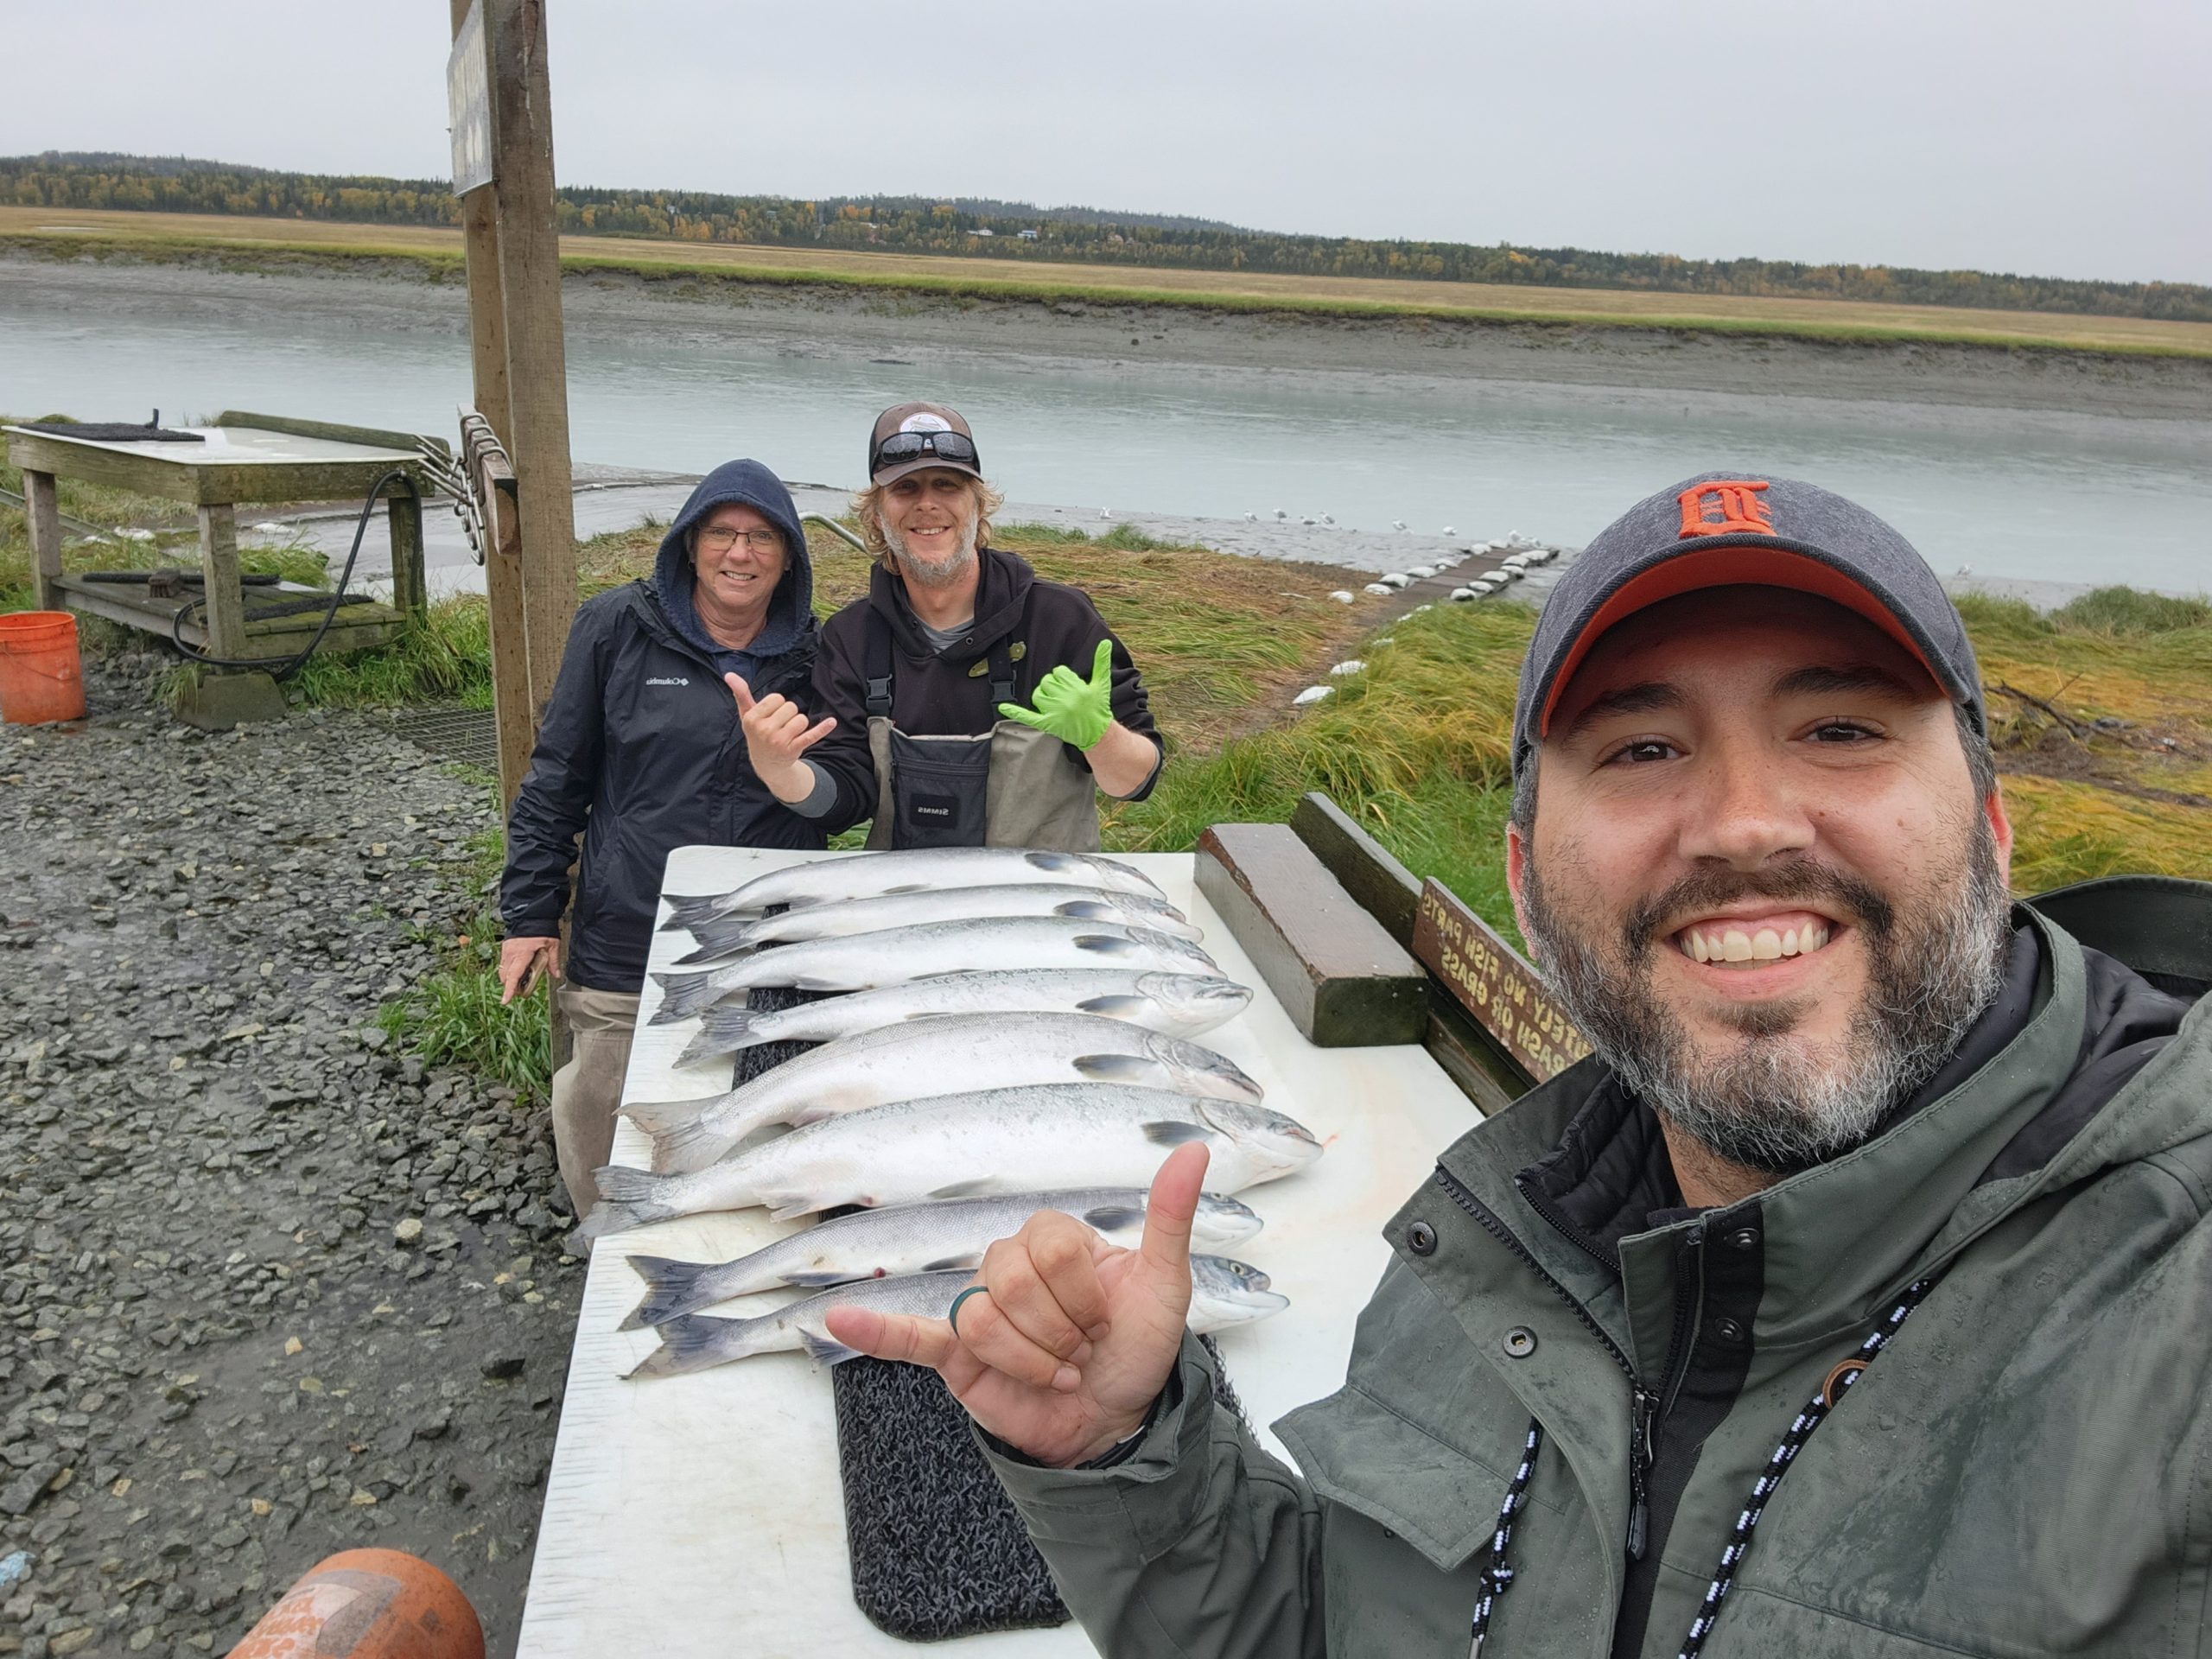 Family of 3 pose together in front of a table of Alaskan fish